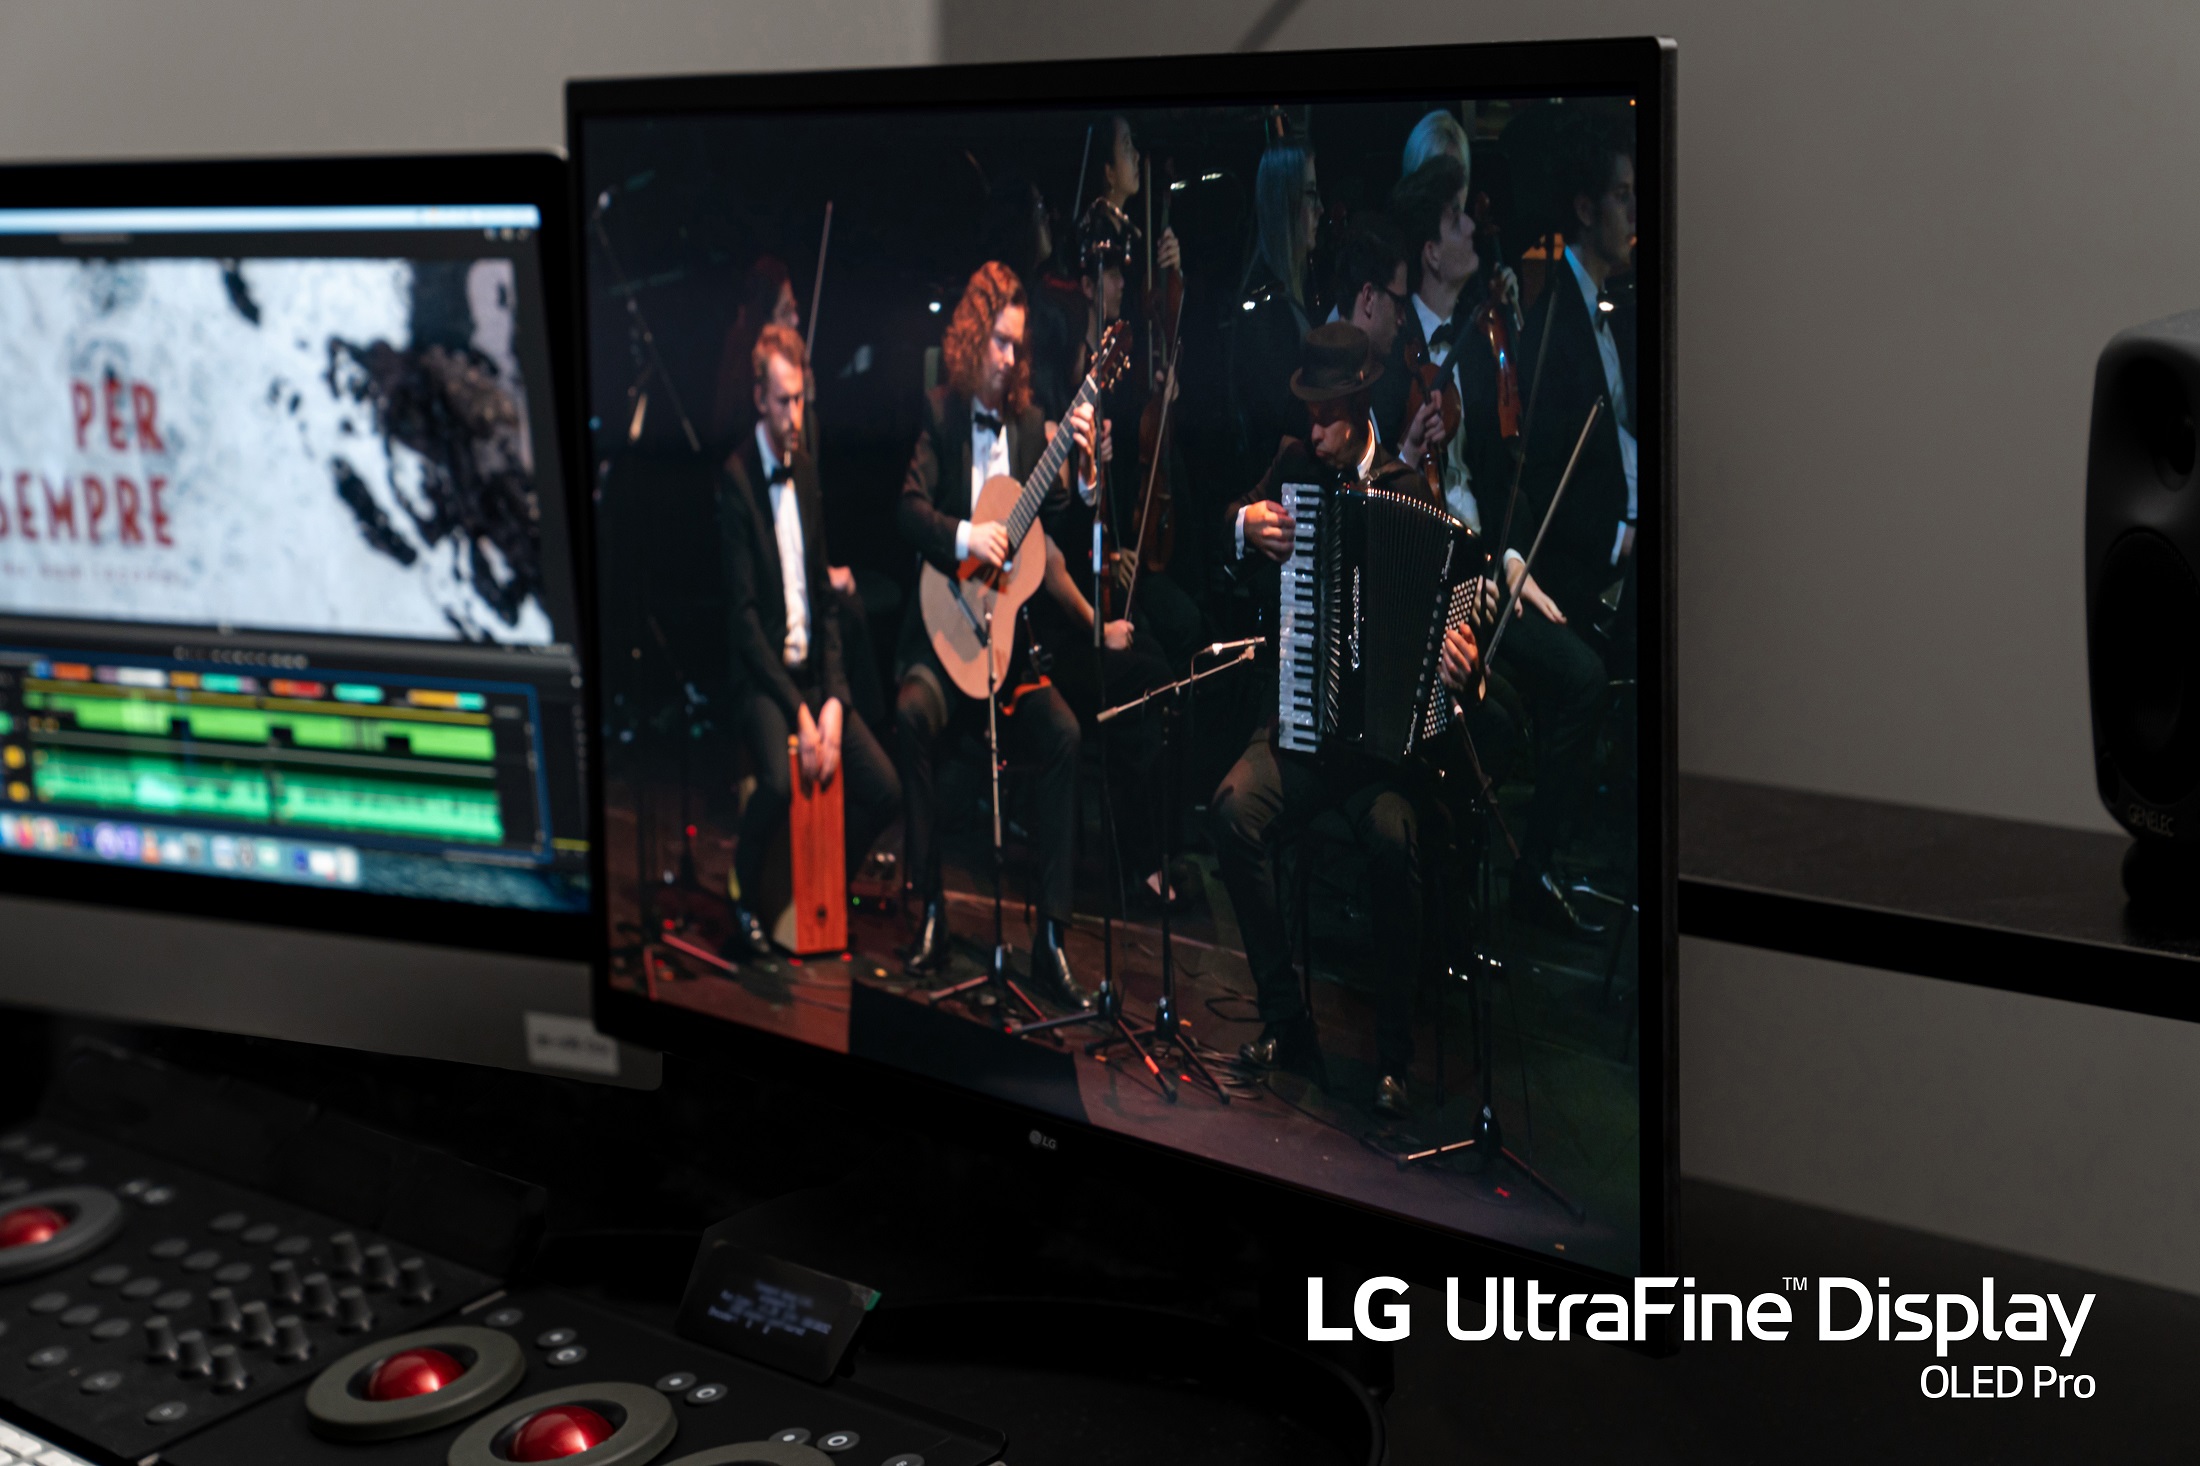 A closeup photo of LG UltraFine Display OLED Pro displaying an orchestra during its performance